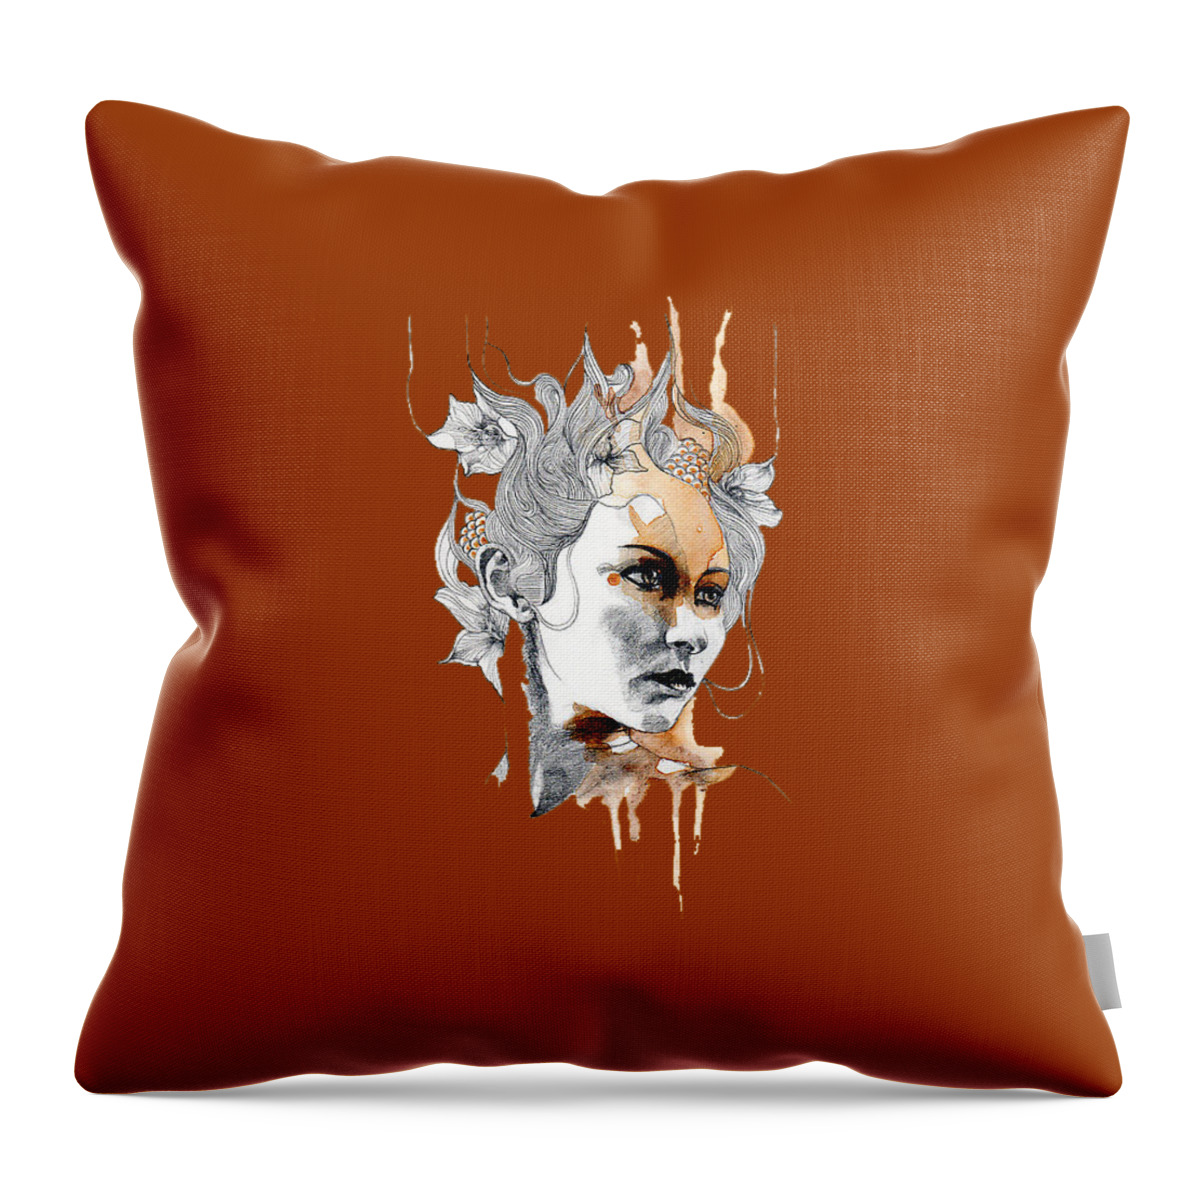 Faces Throw Pillow featuring the painting Concerned T-shirt by Herb Strobino